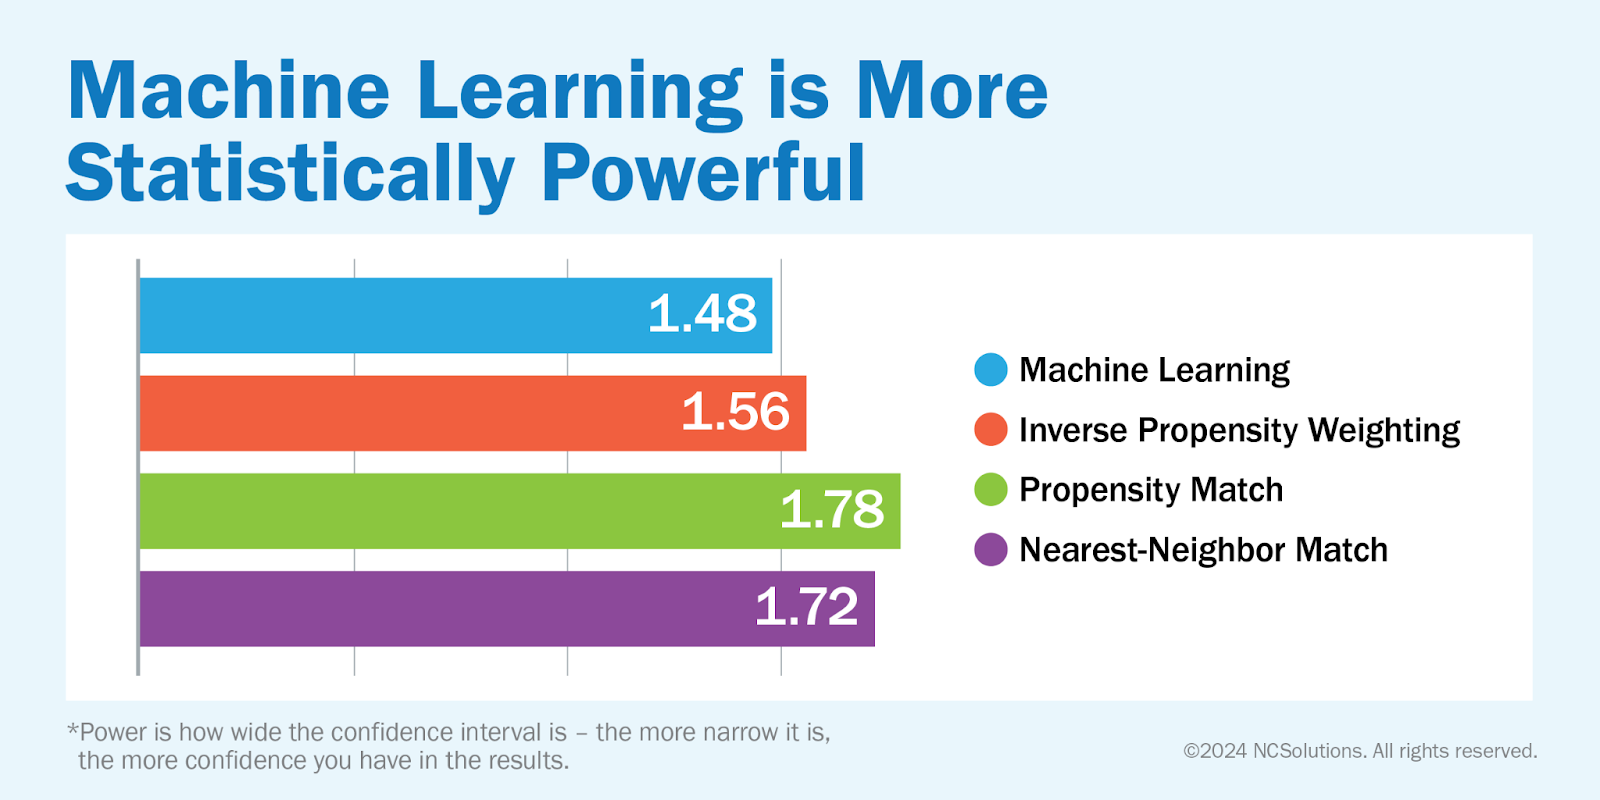 Machine learning is more statistically powerful